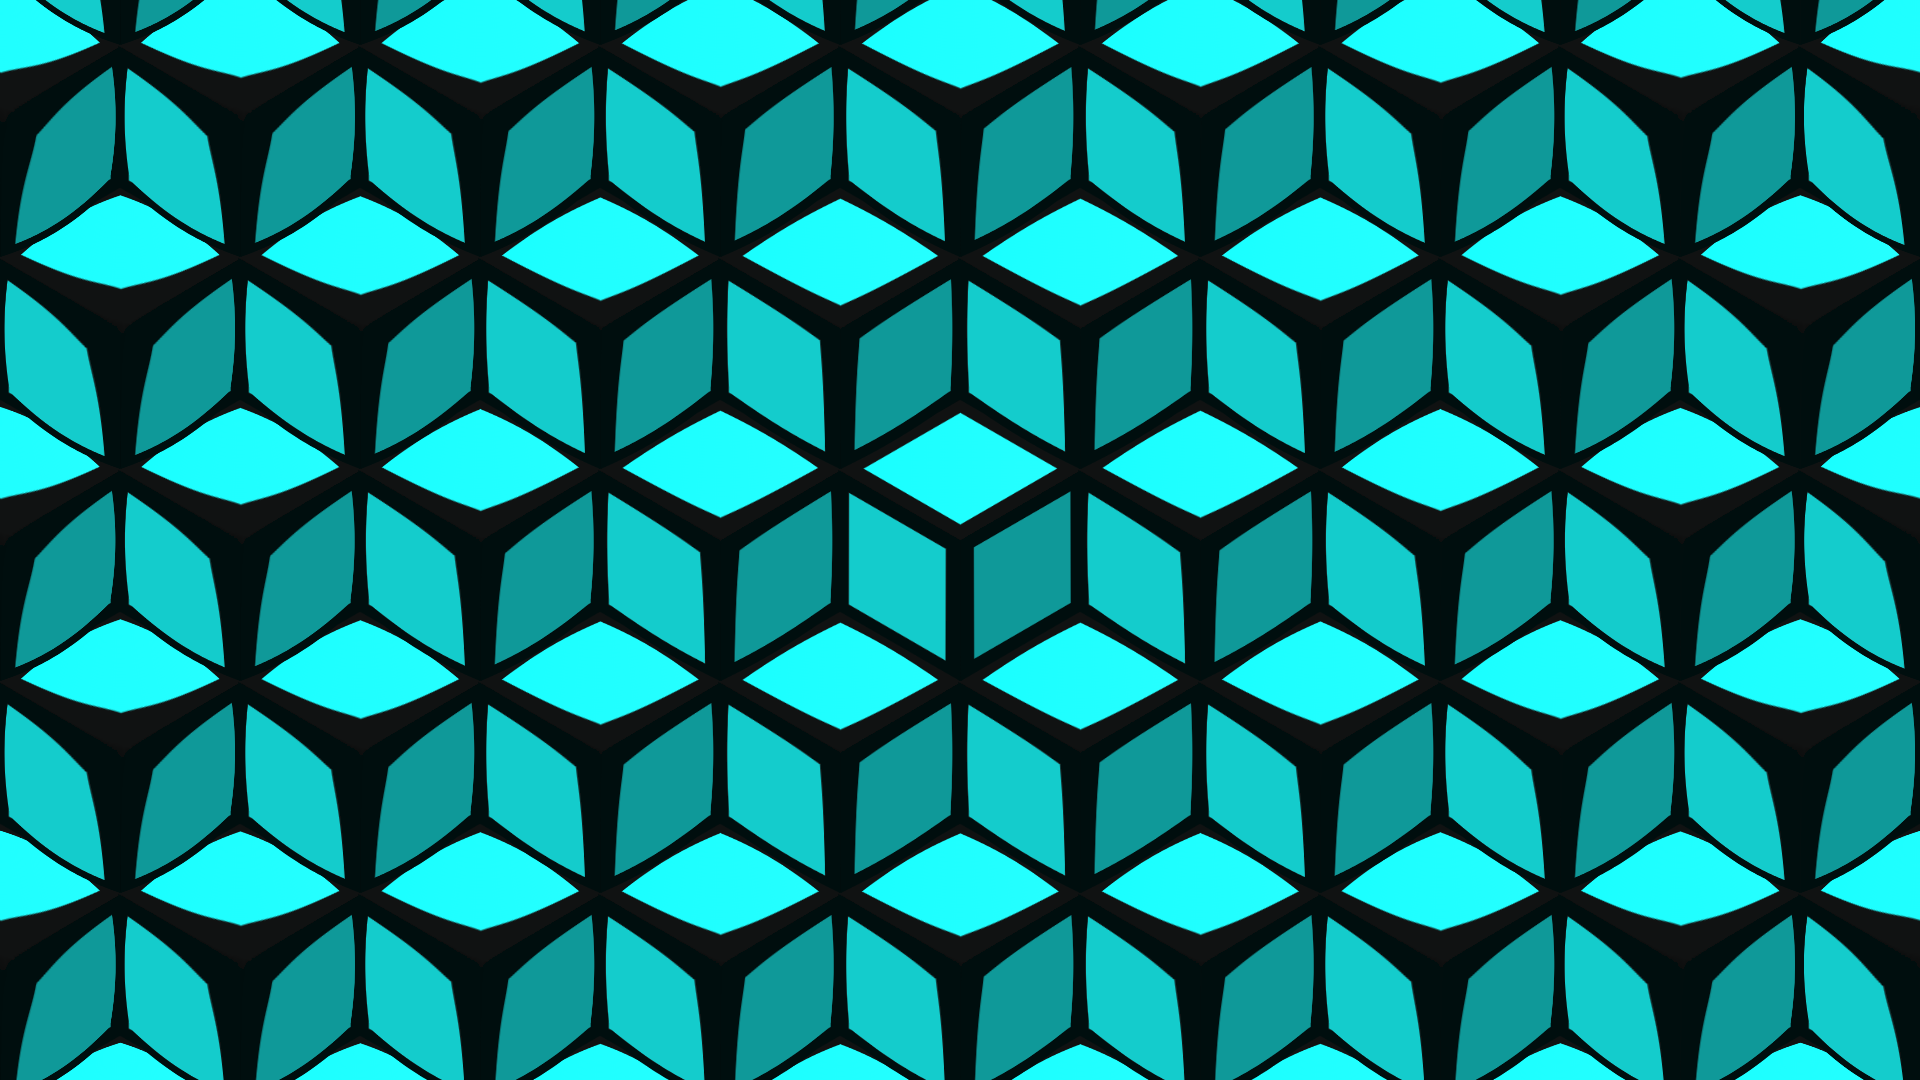 General 1920x1080 abstract 3D Abstract cube CGI digital art minimalism geometry colorful shapes geometric figures artwork texture pattern beehive patterns simple background cyan